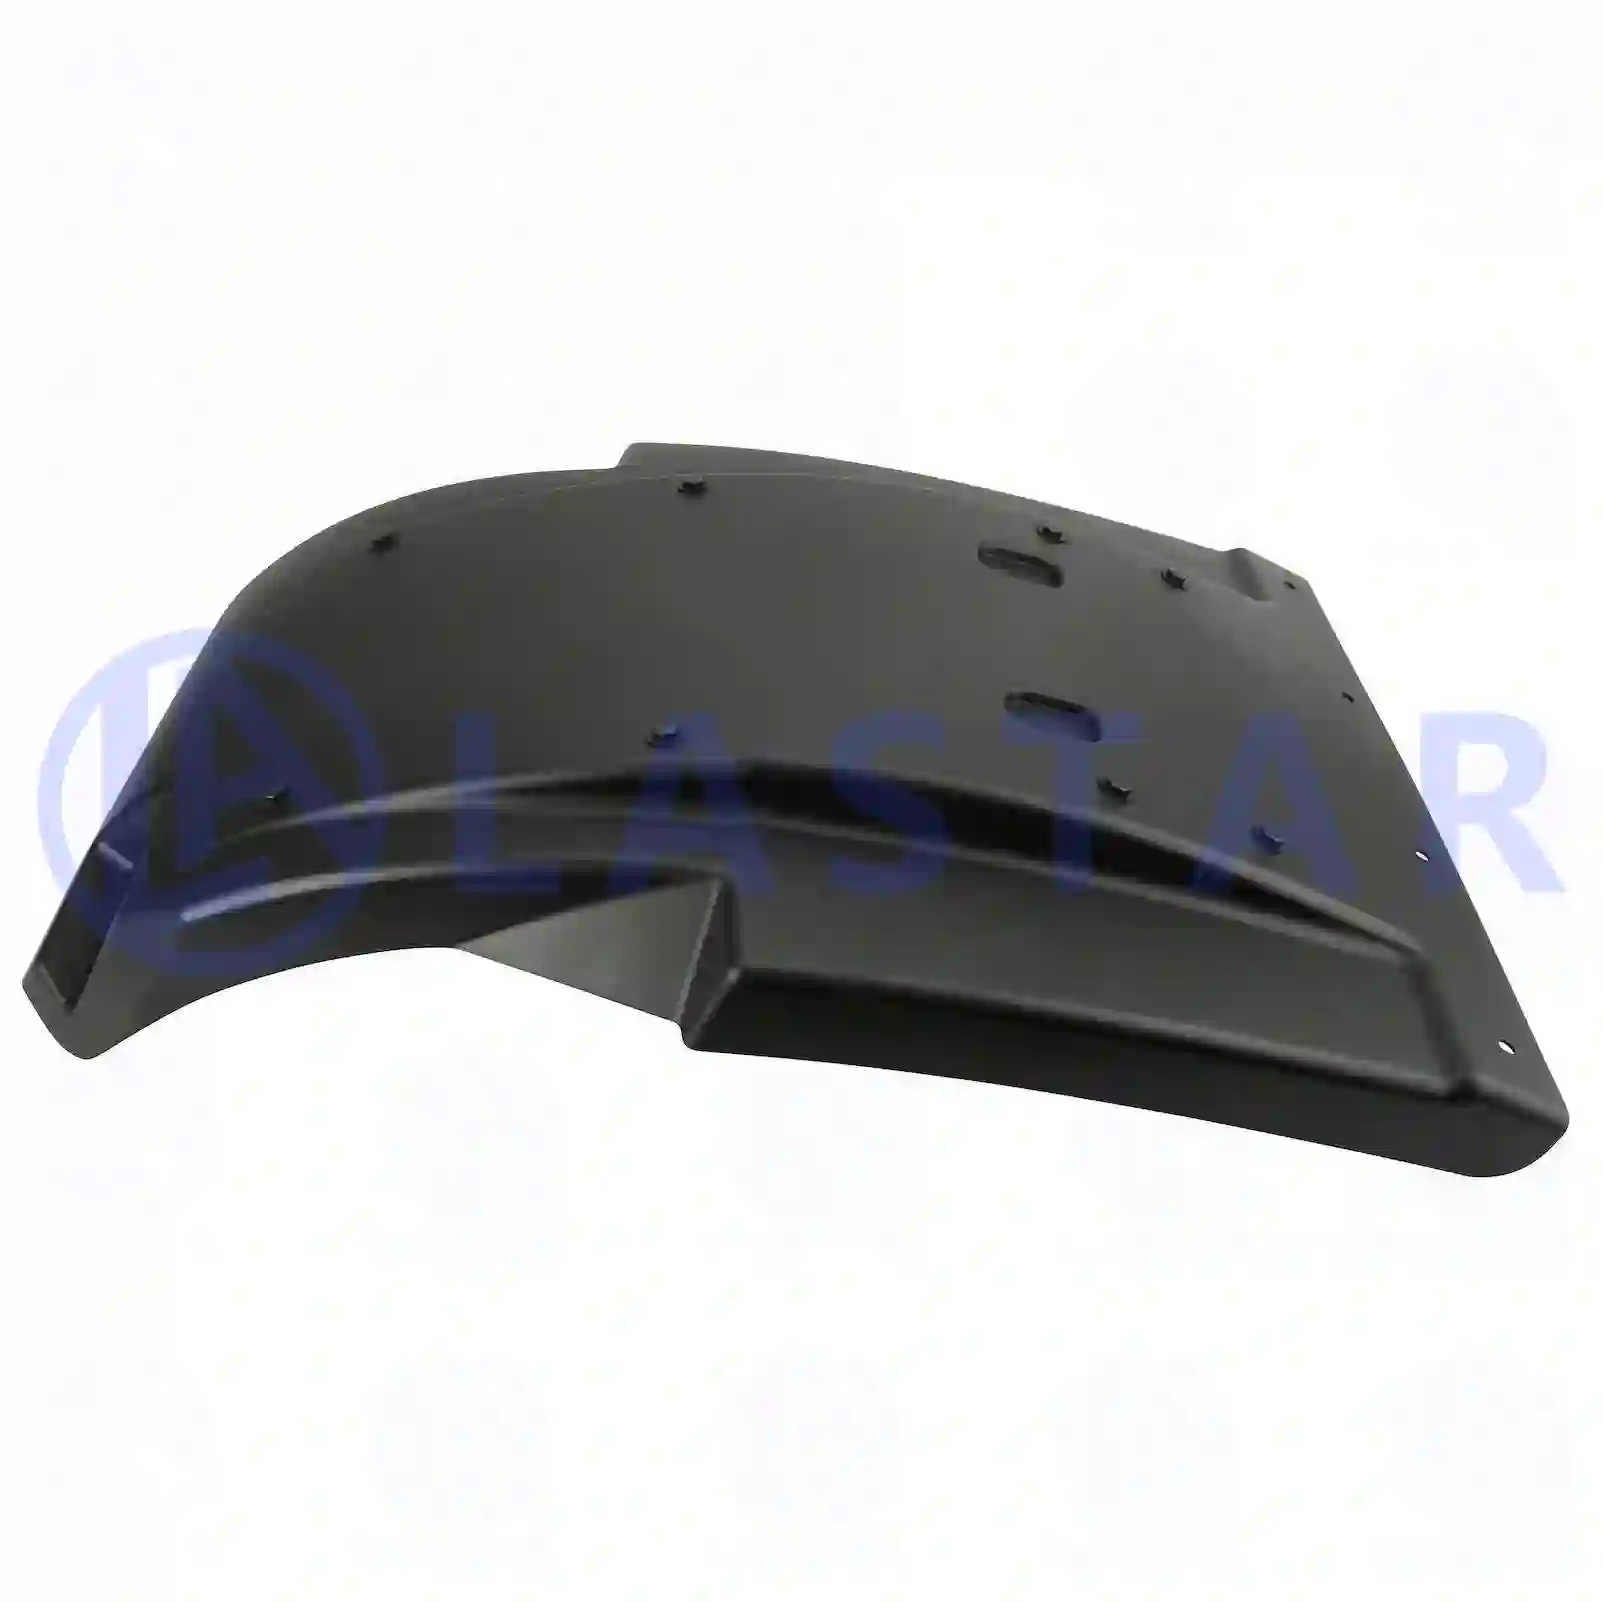  Fender, front, right || Lastar Spare Part | Truck Spare Parts, Auotomotive Spare Parts